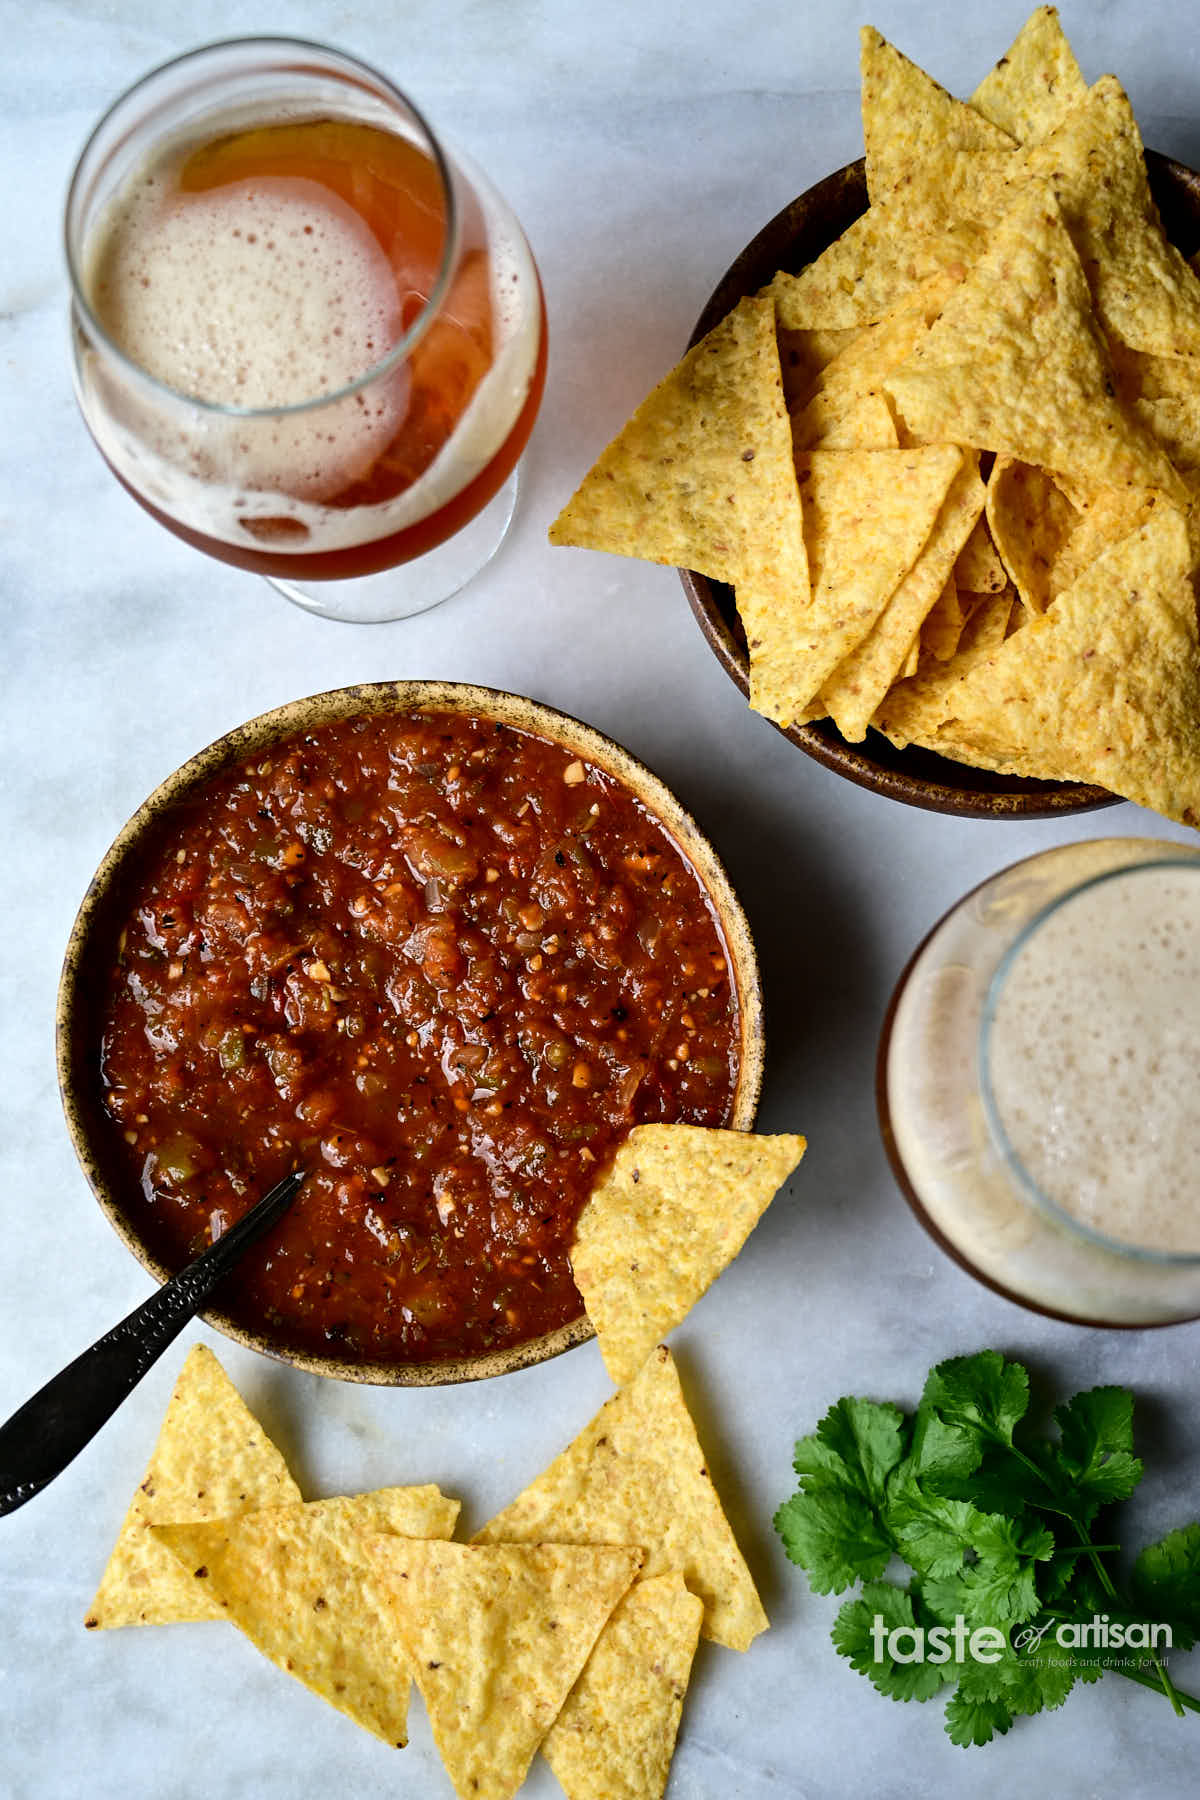 Charred, smoky salsa roja made with charred tomatoes jalapeno peppers and garlic. Smoky, rich with dark red color, exceptionally tasty, this salsa roja is so addictive. It's especially tasty when made with vine-ripened tomatoes when they are in season.